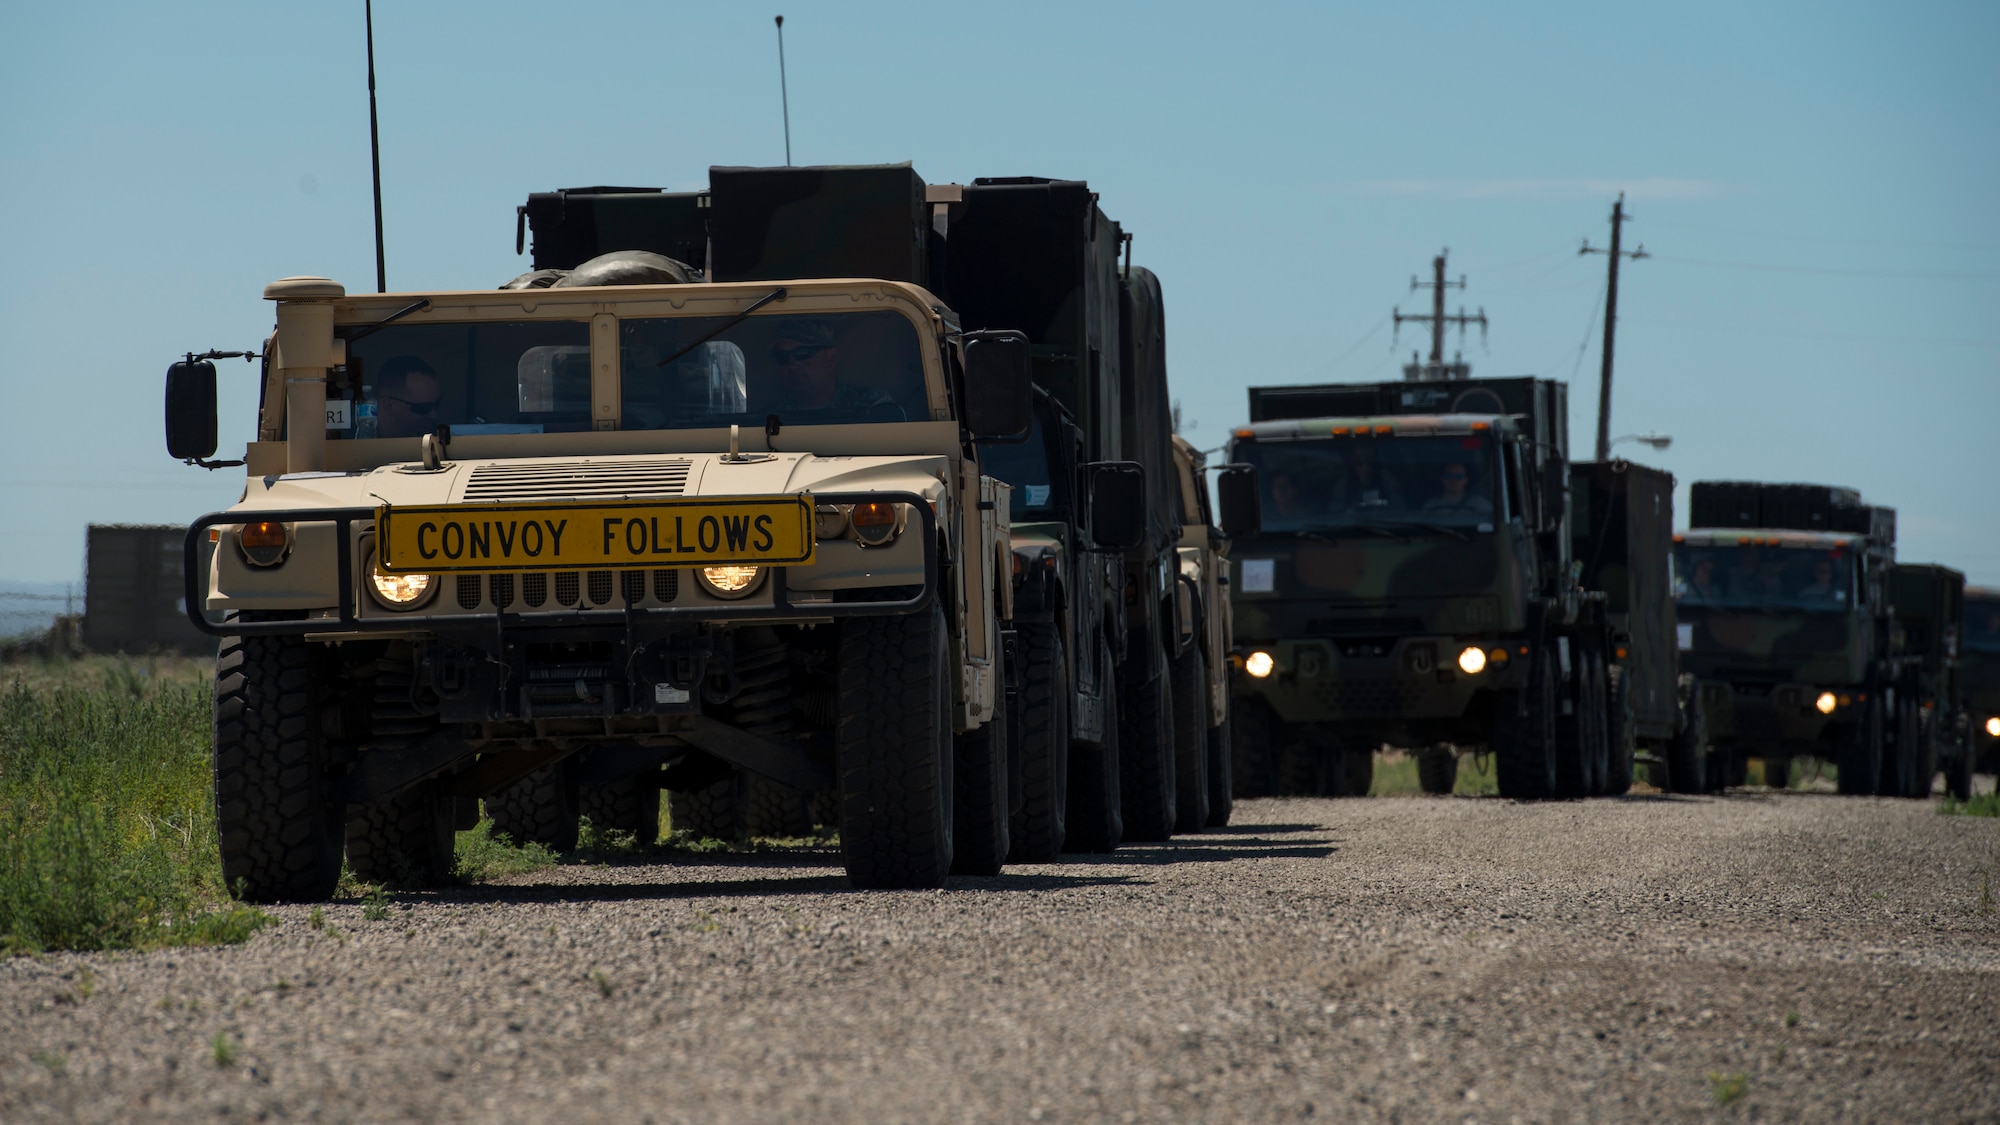 A U.S. Air Force convoy of 5-ton trucks from the 726th Air Control Squadron transports a variety of equipment July 14, 2019, near Mountain Home Air Force Base, Idaho. This convoy was in support of Hardrock Exercise 19-2, where supplies on the truck enabled the 726th ACS Airmen to set up an entirely self-sufficient base in a simulated remote location. (U.S. Air Force photo by Senior Airman JaNae Capuno)